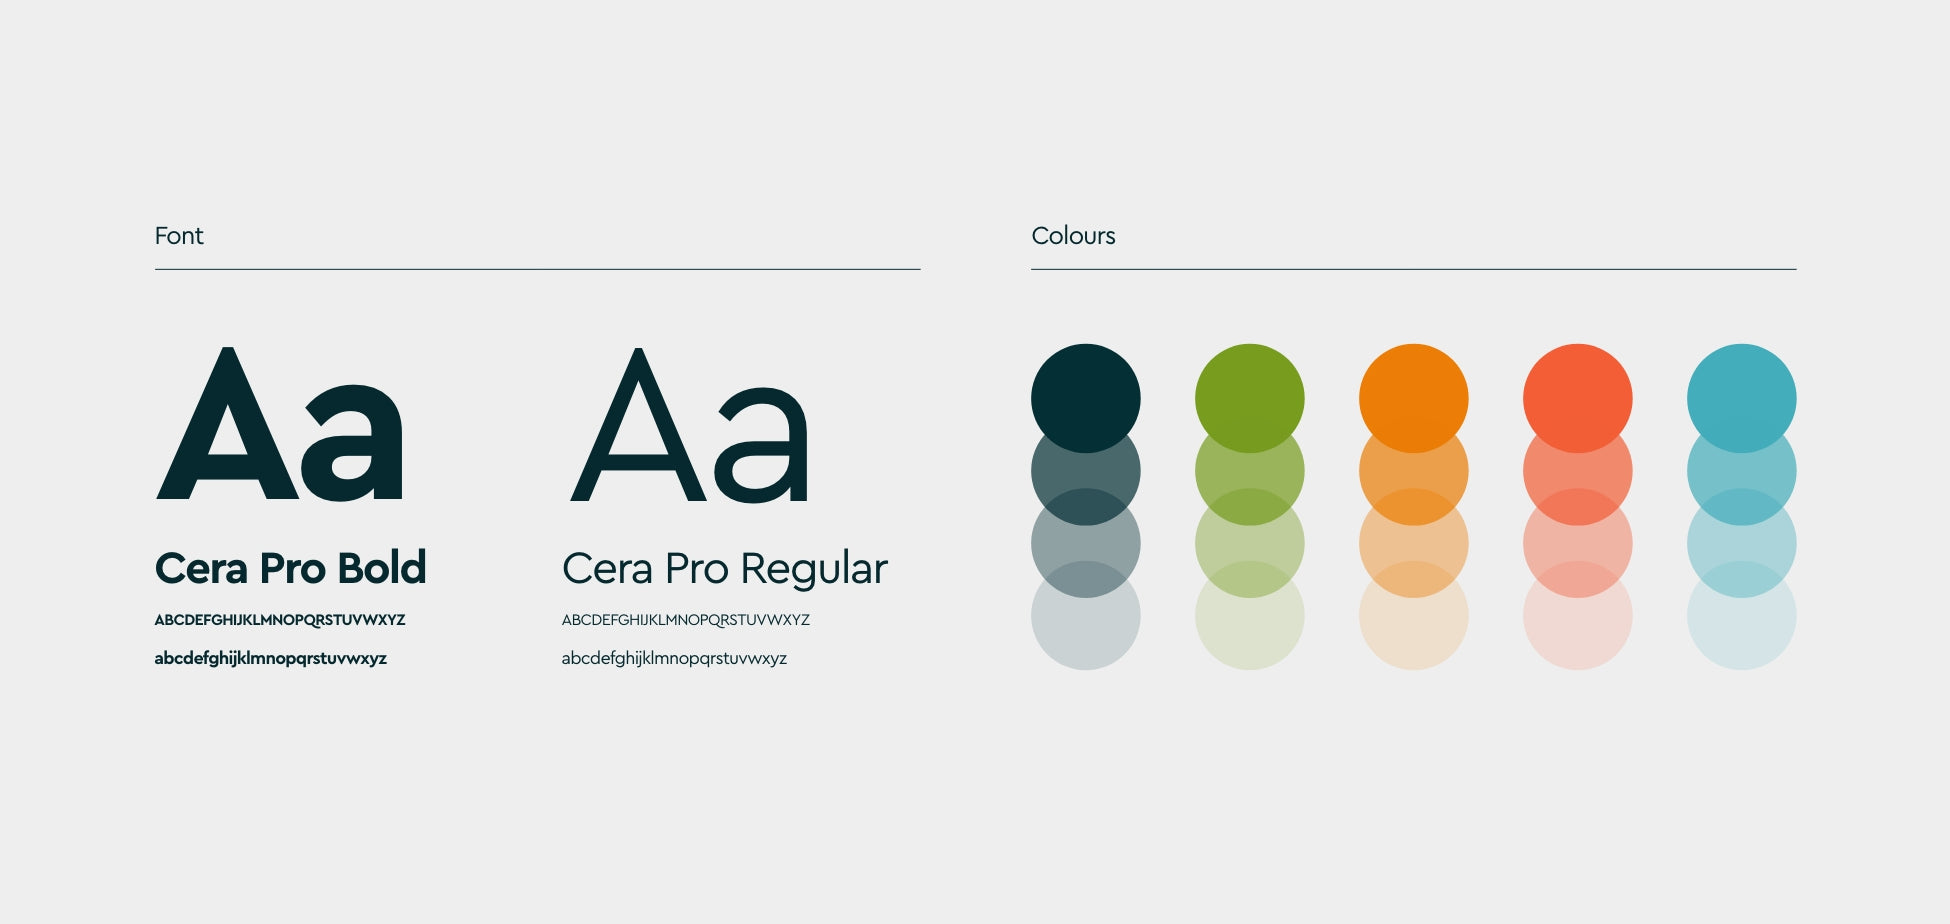 Brand guidelines for colours and fonts.